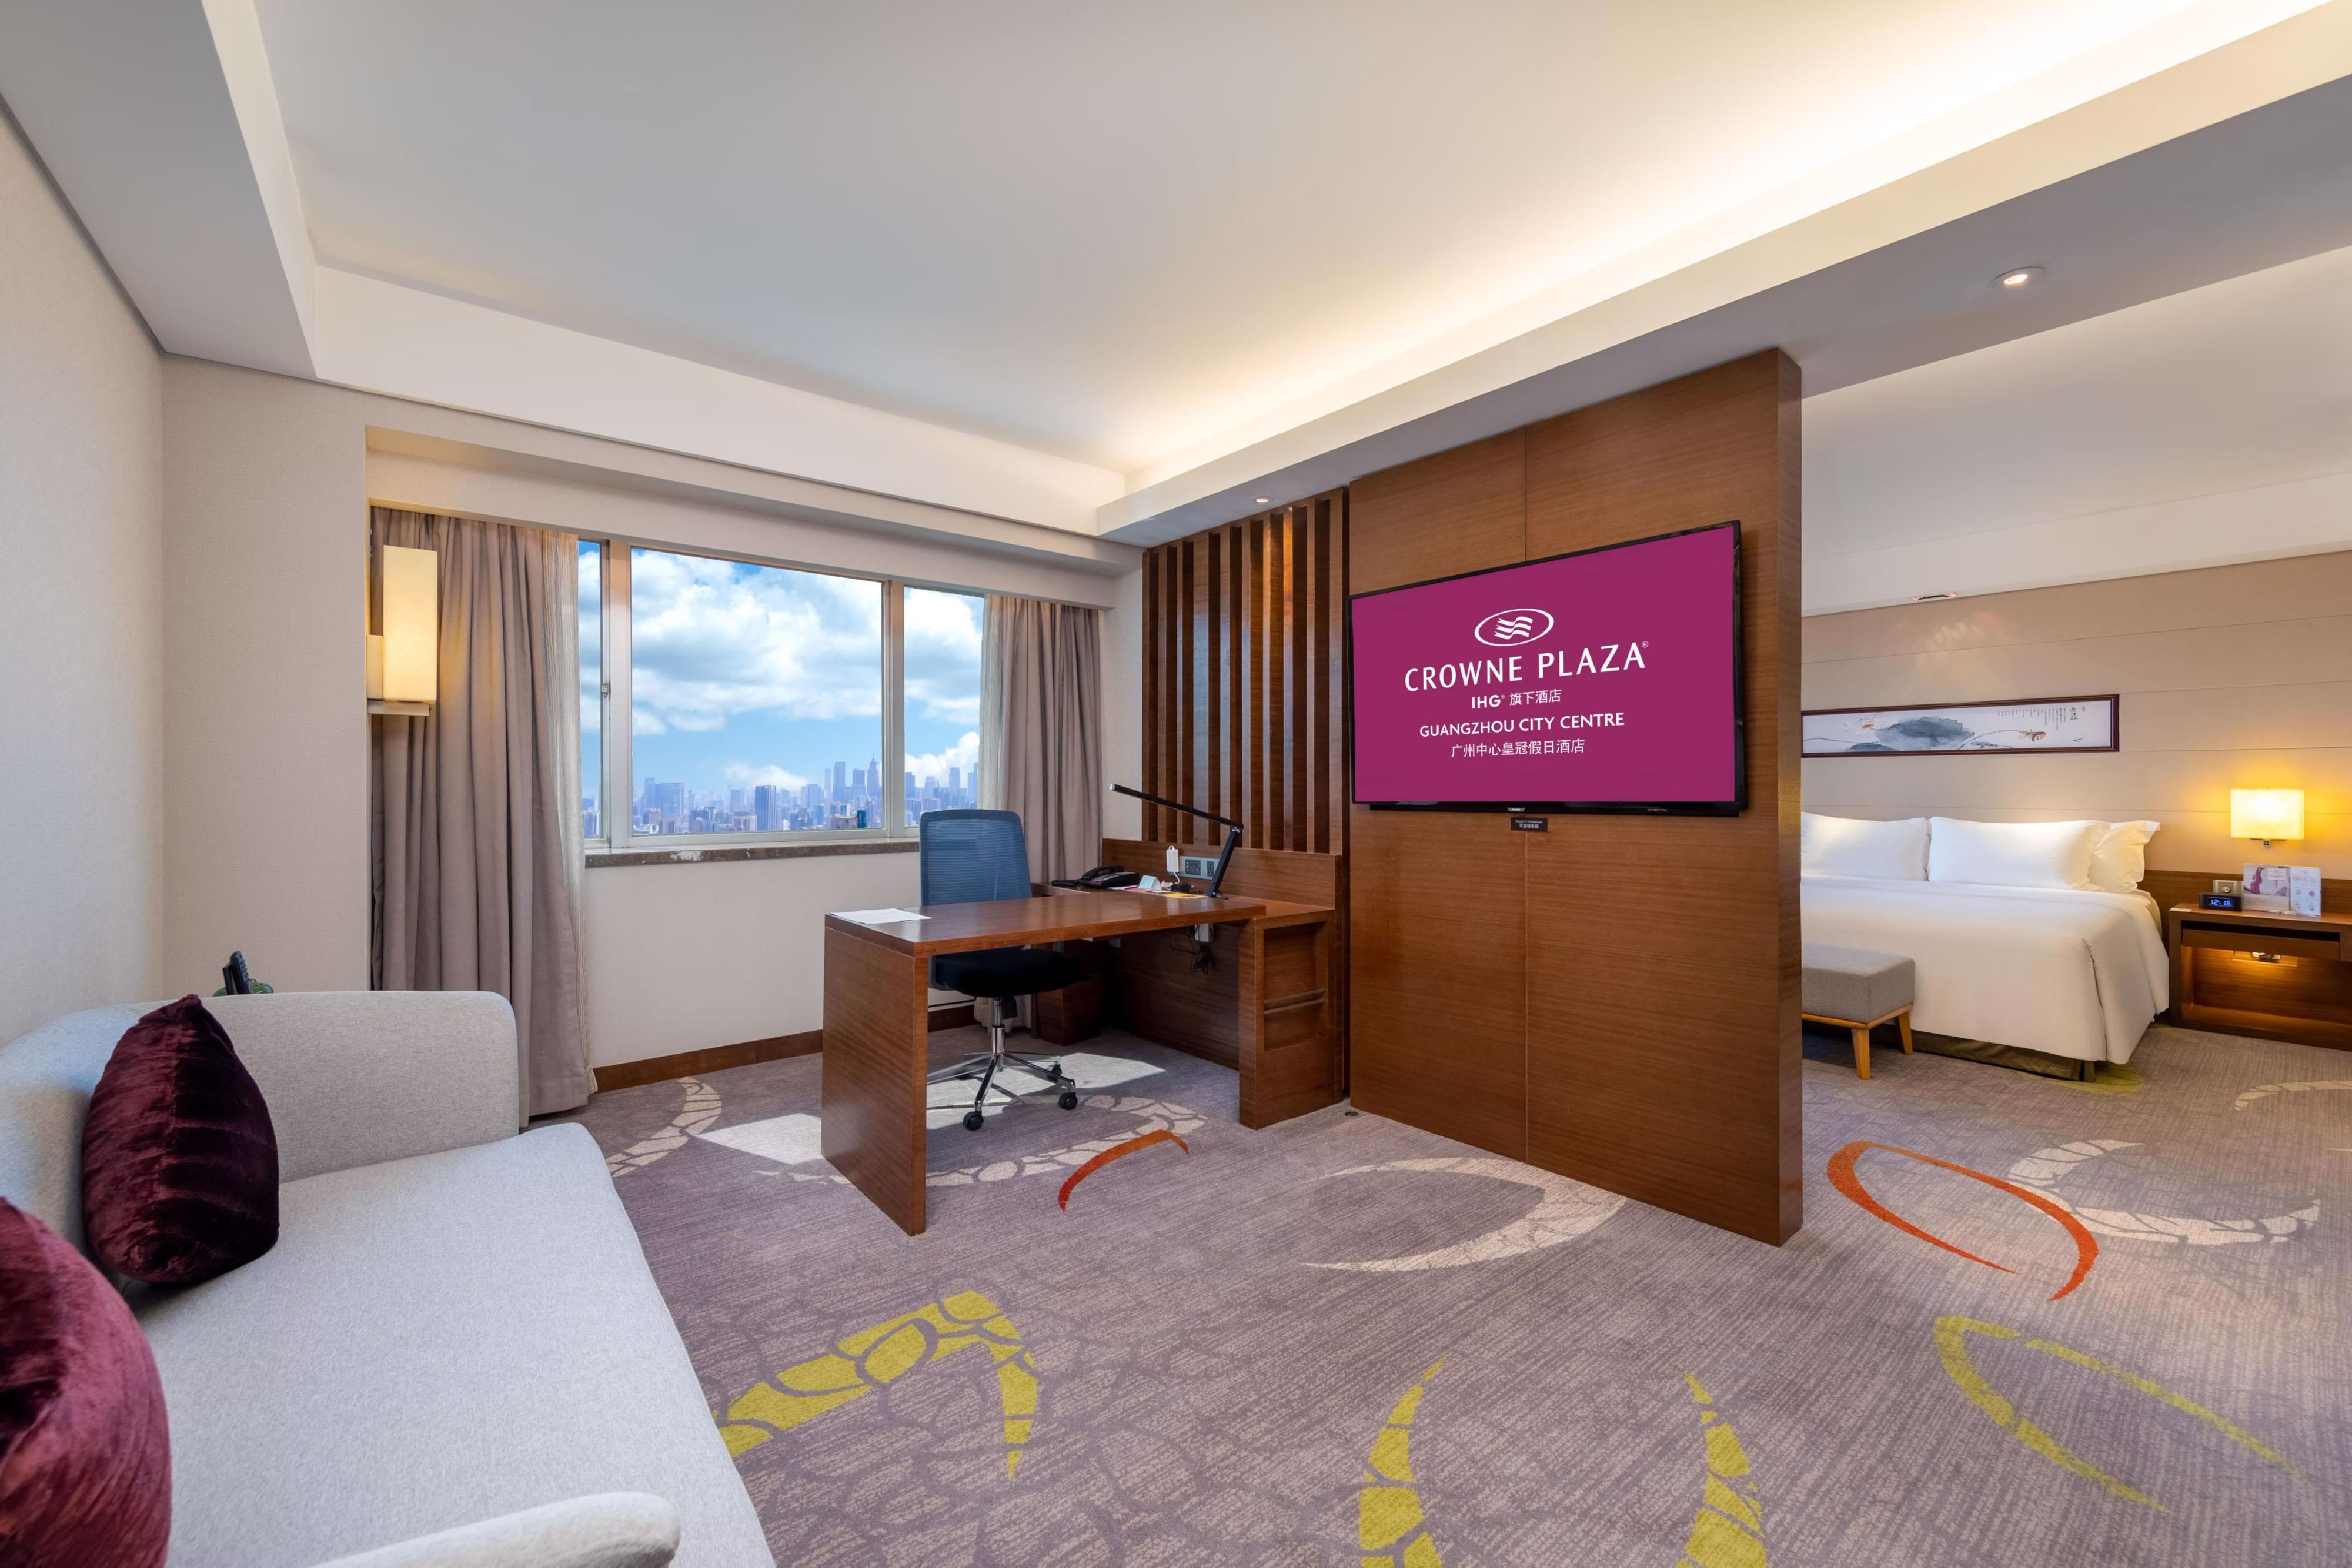 Crowne Plaza Guangzhou City Centre Guest Room